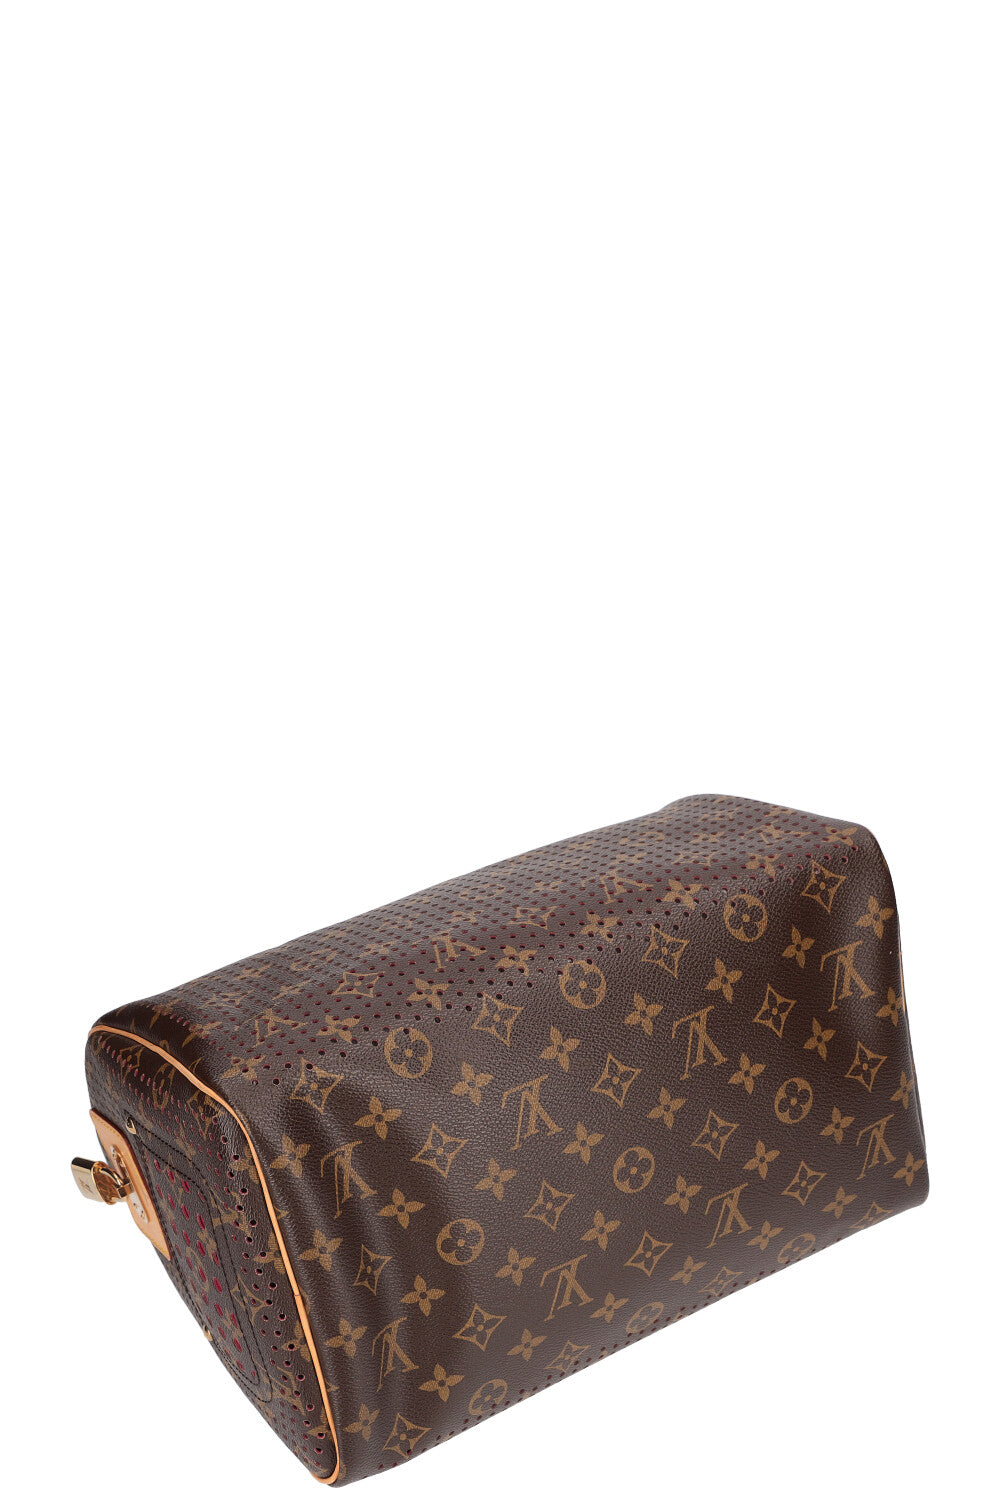 Louis Vuitton for her 1399/- – Luxury Hack